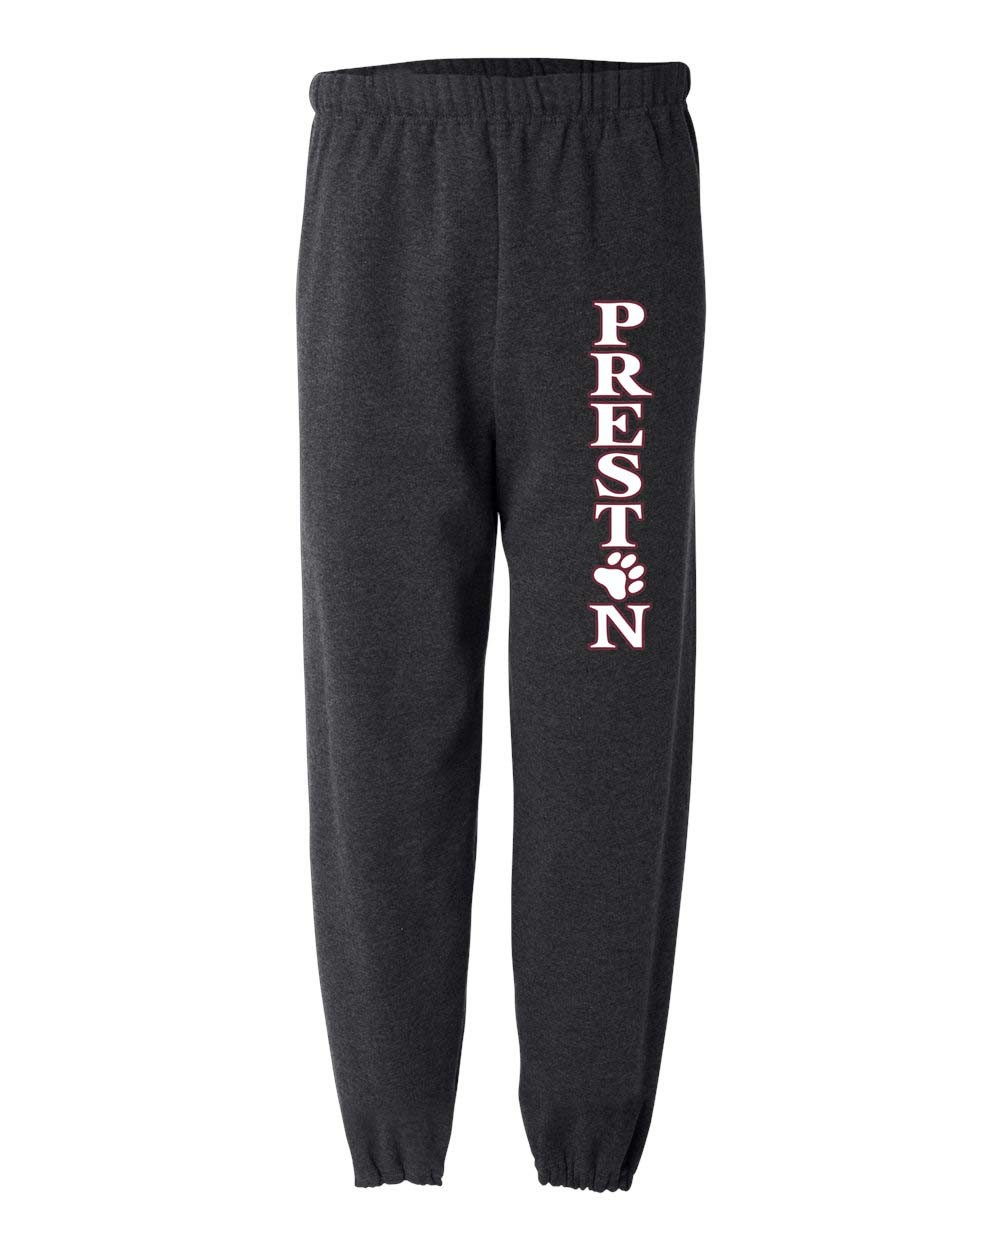 PHS Spirit Sweatpants w/ Paw Logo #9- Please Allow 2-3 Weeks for Fulfillment